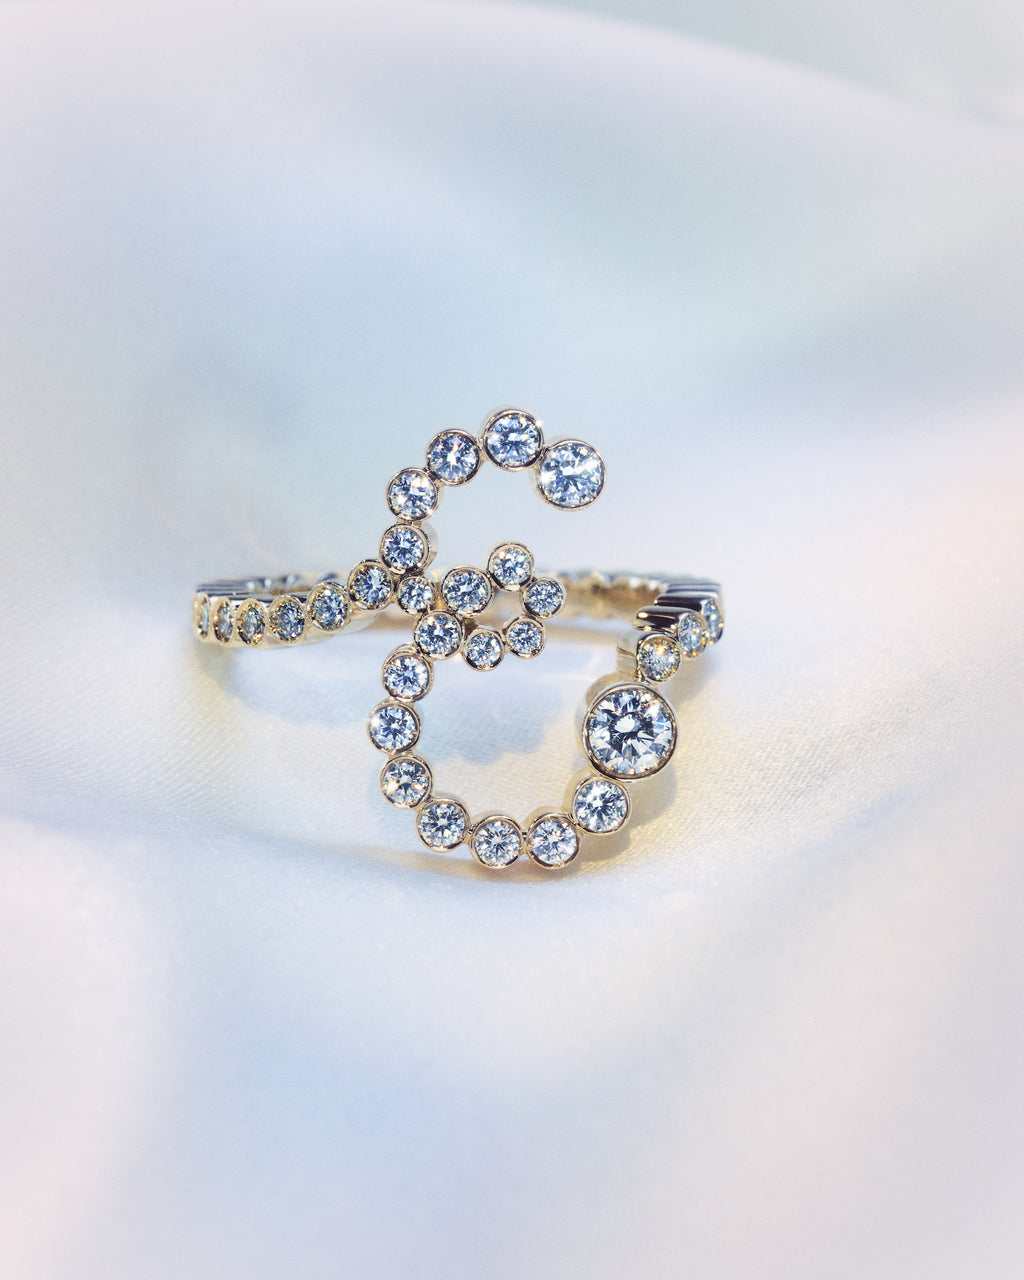 18K yellow gold diamond ring shaped as the letter 'E'.